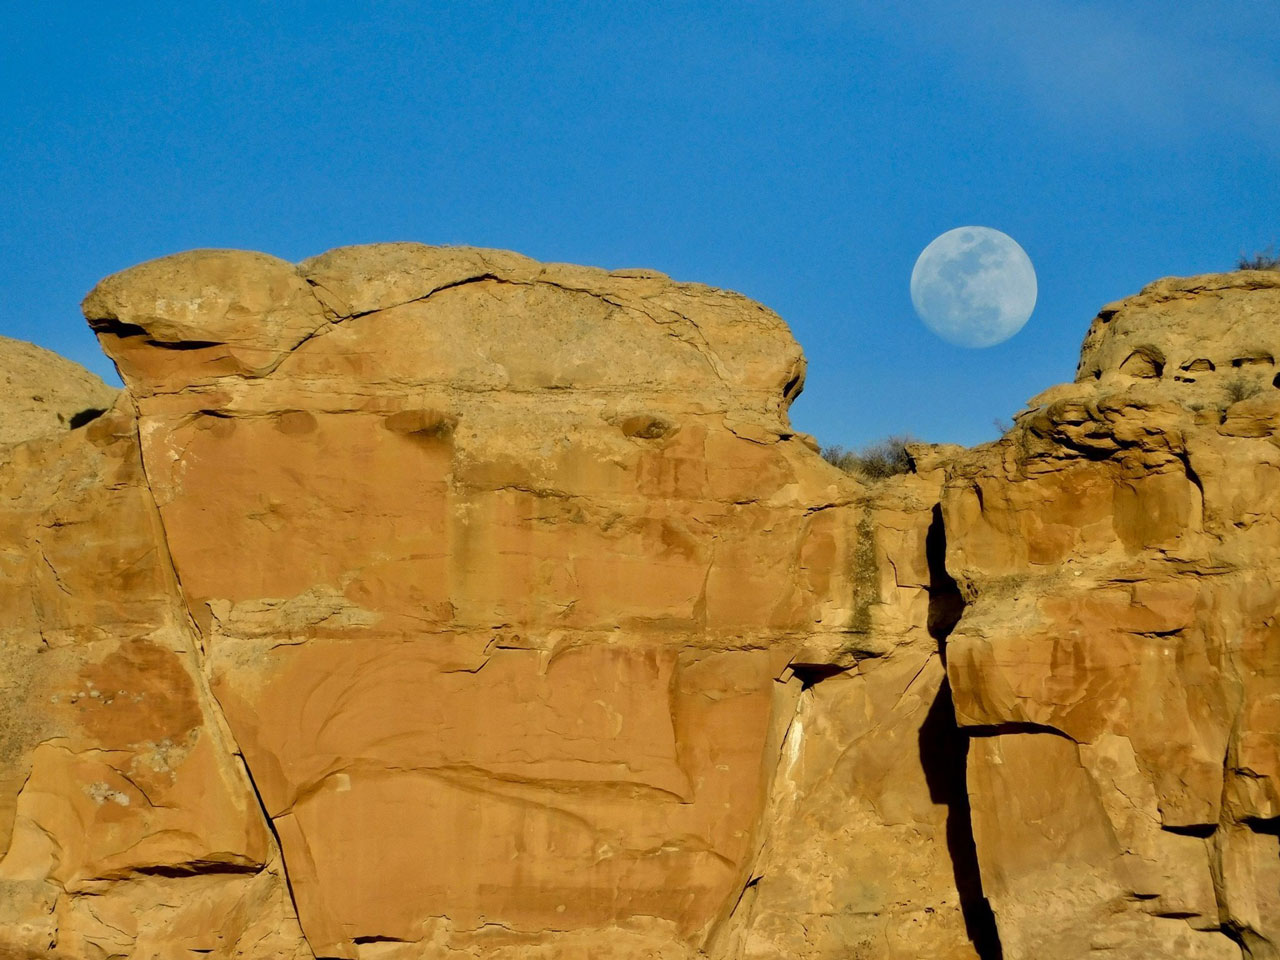 The full Moon rises in daylight above ancient ruins carved into a steep desert cliff face.